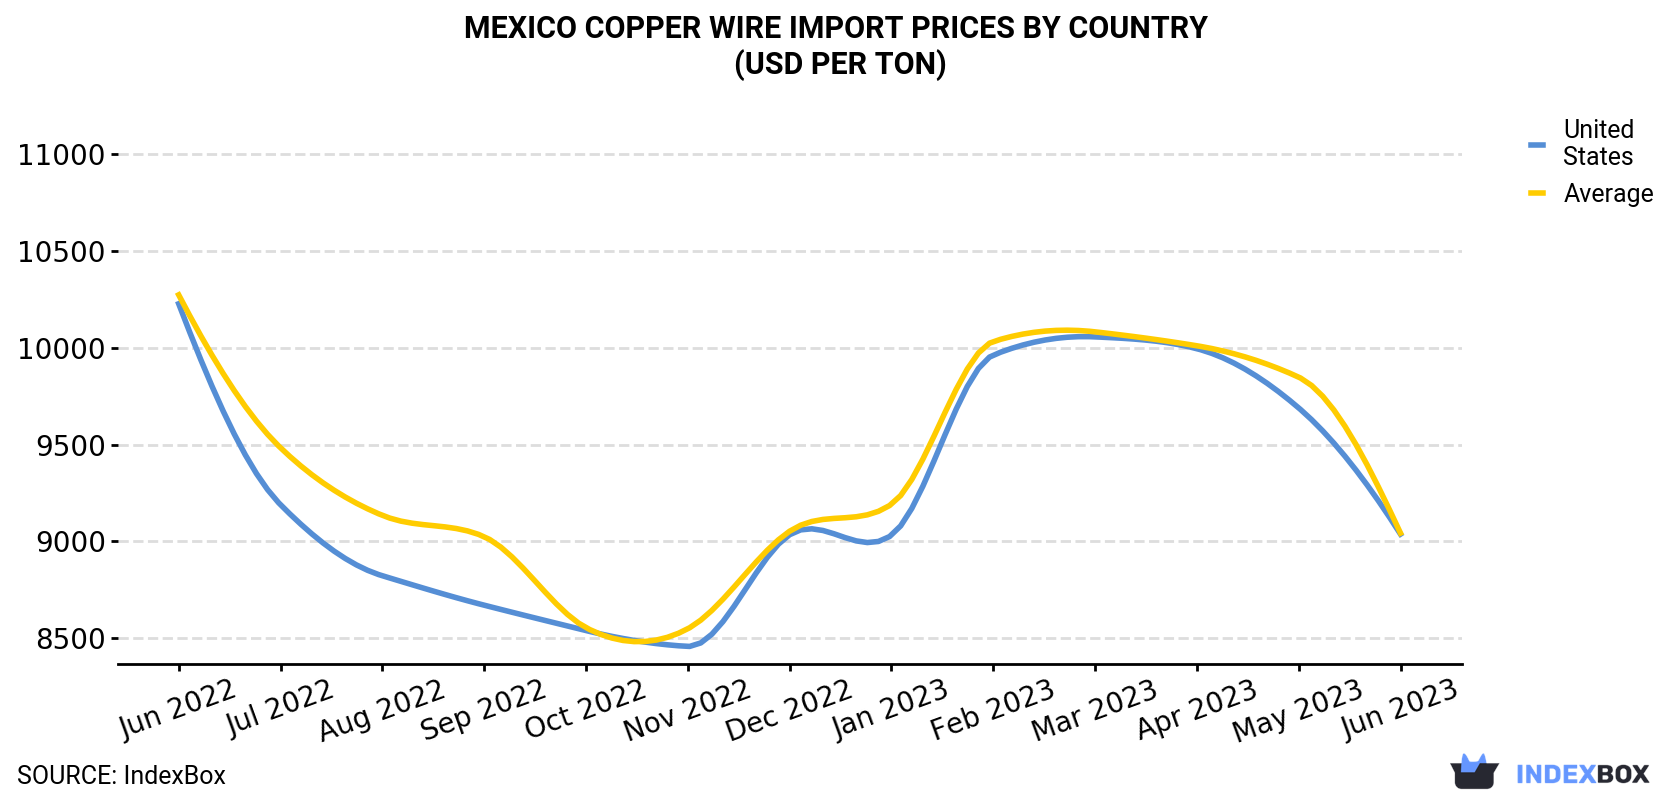 Mexico Copper Wire Import Prices By Country (USD Per Ton)